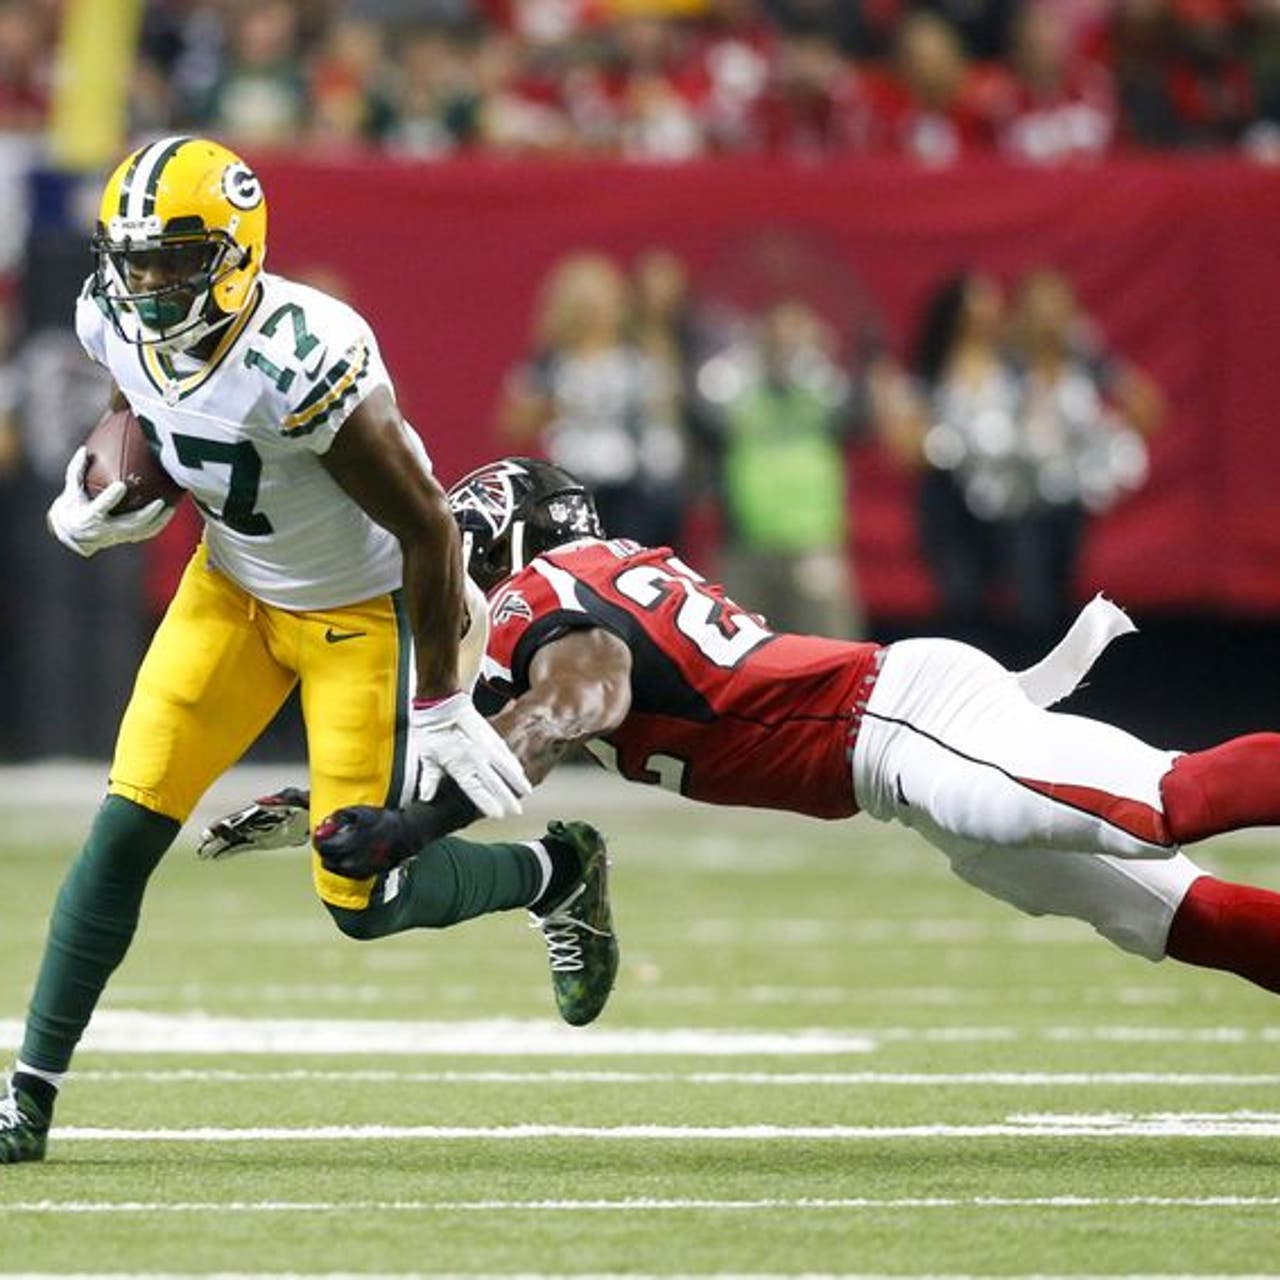 Packers vs Falcons Live Stream: Watch NFC Championship Online